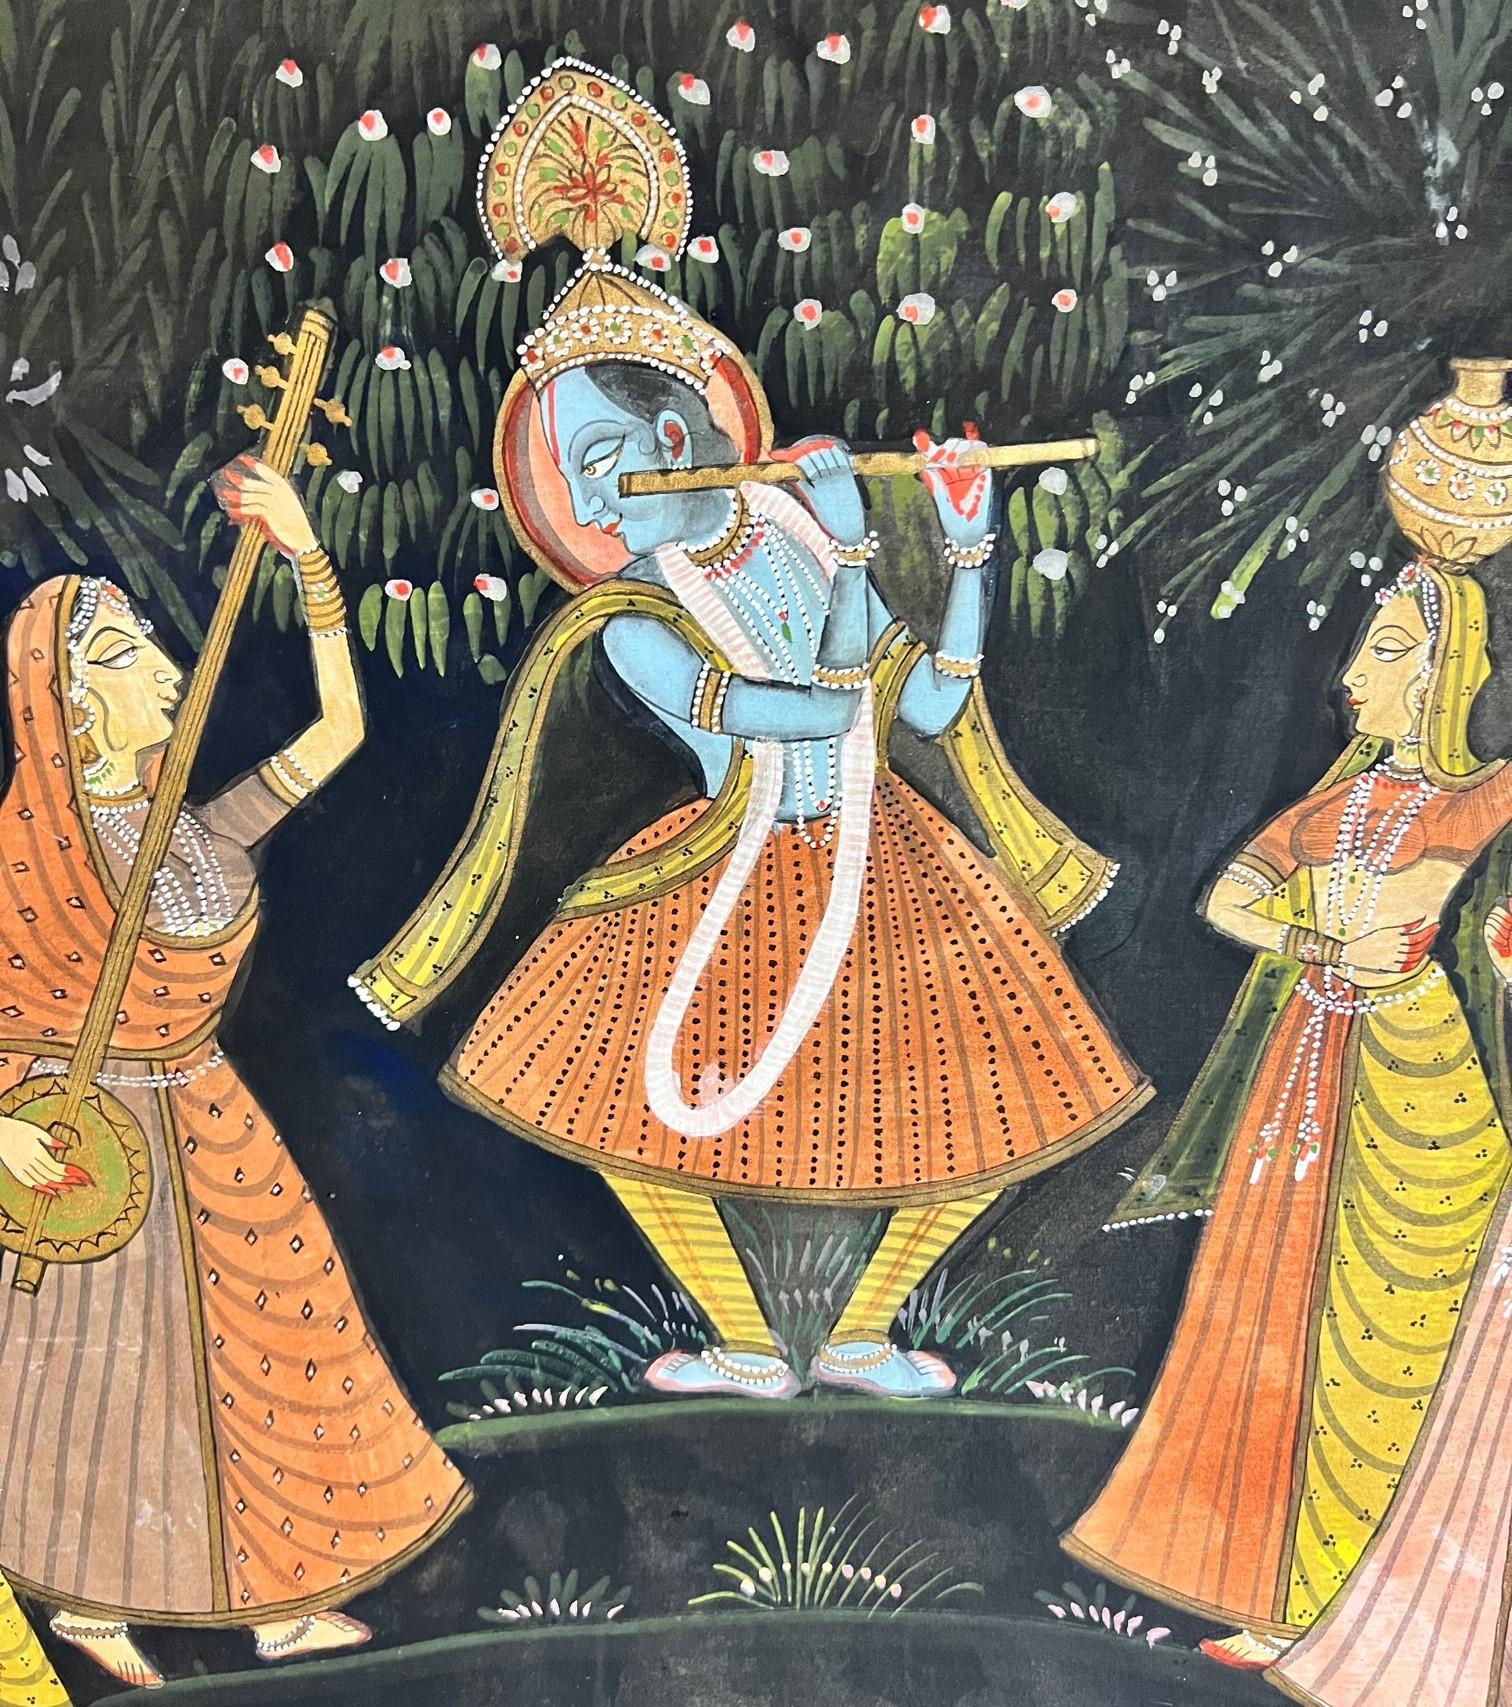 Vintage Pichhavai painting on fabric of Krishna playing is flute with Radha and female Gopis gathered by his side. The colors, details and facial expressions on the figures depicted in this painting are quite arresting. 

Pichhavai is a style of